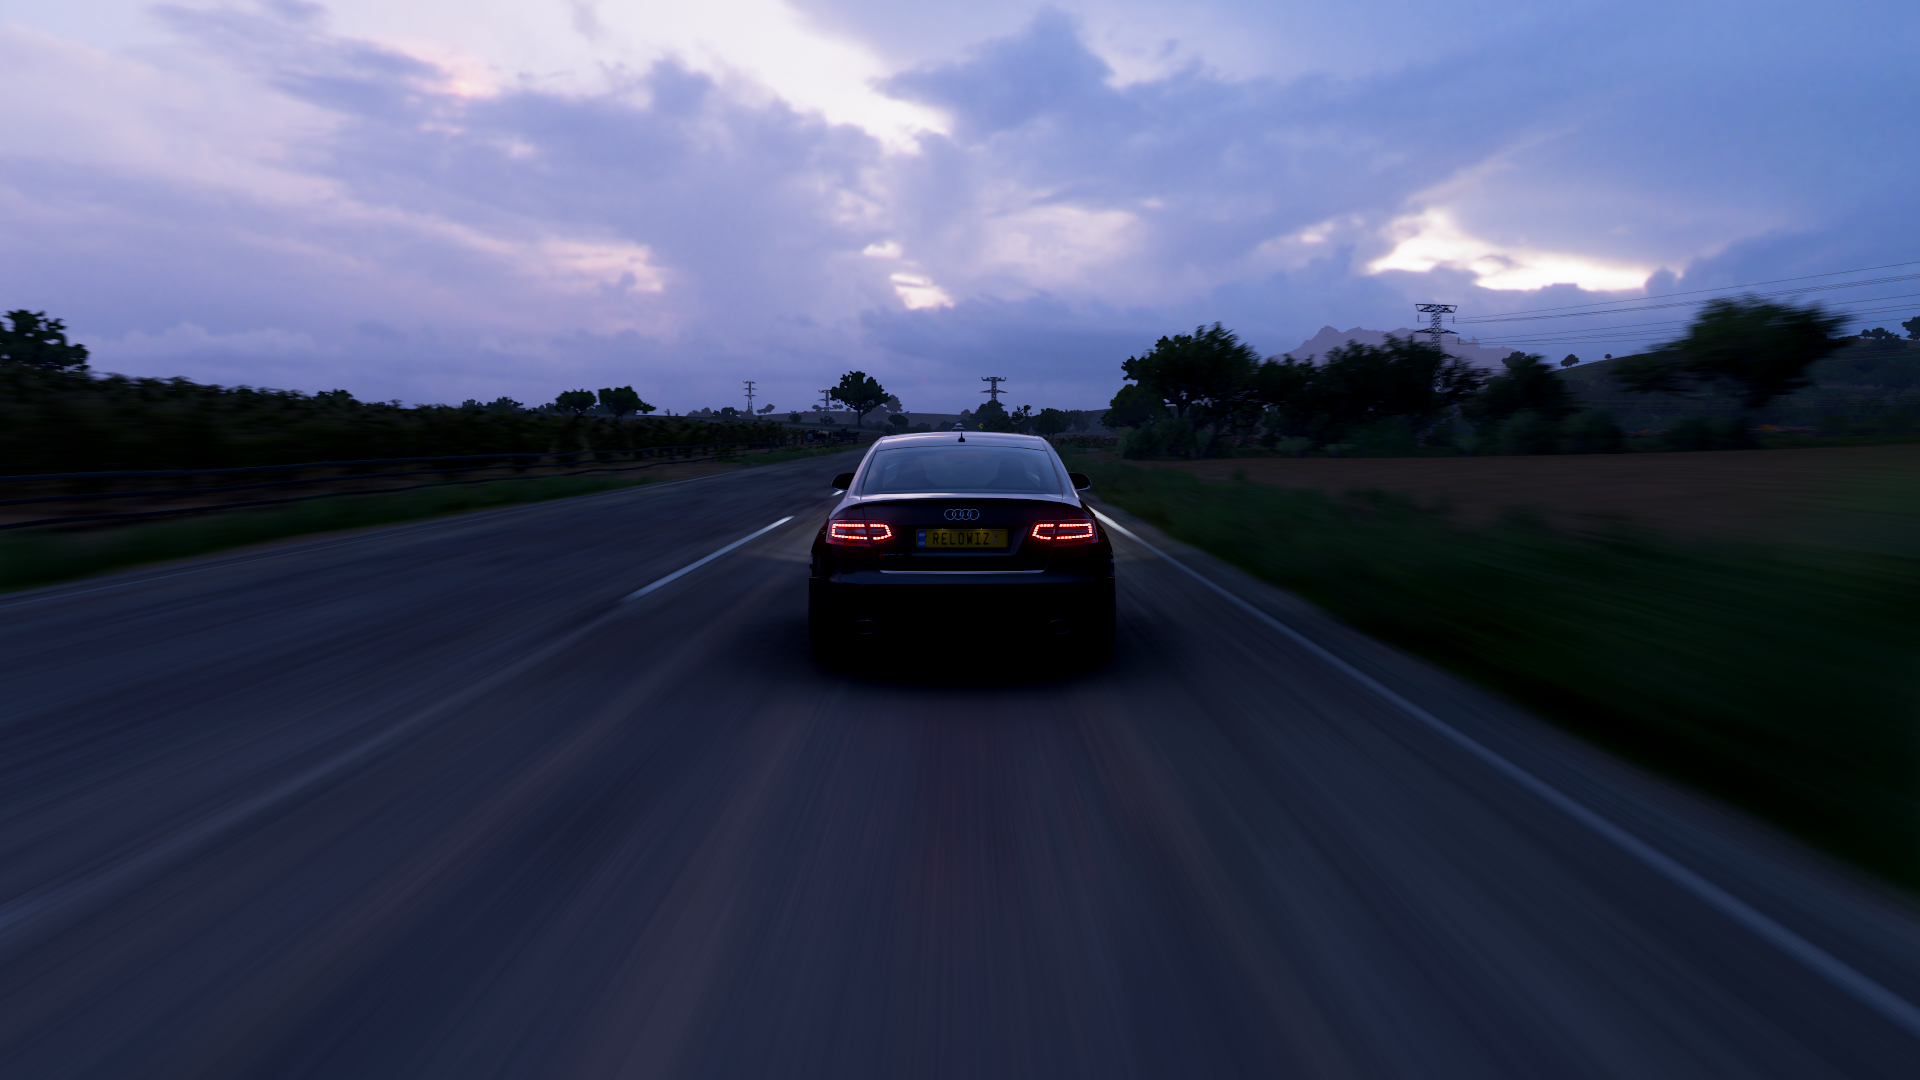 Forza Forza Horizon 5 Audi Audi RS6 Car Video Games Road CGi Taillights Clouds Rear View Sky 1920x1080